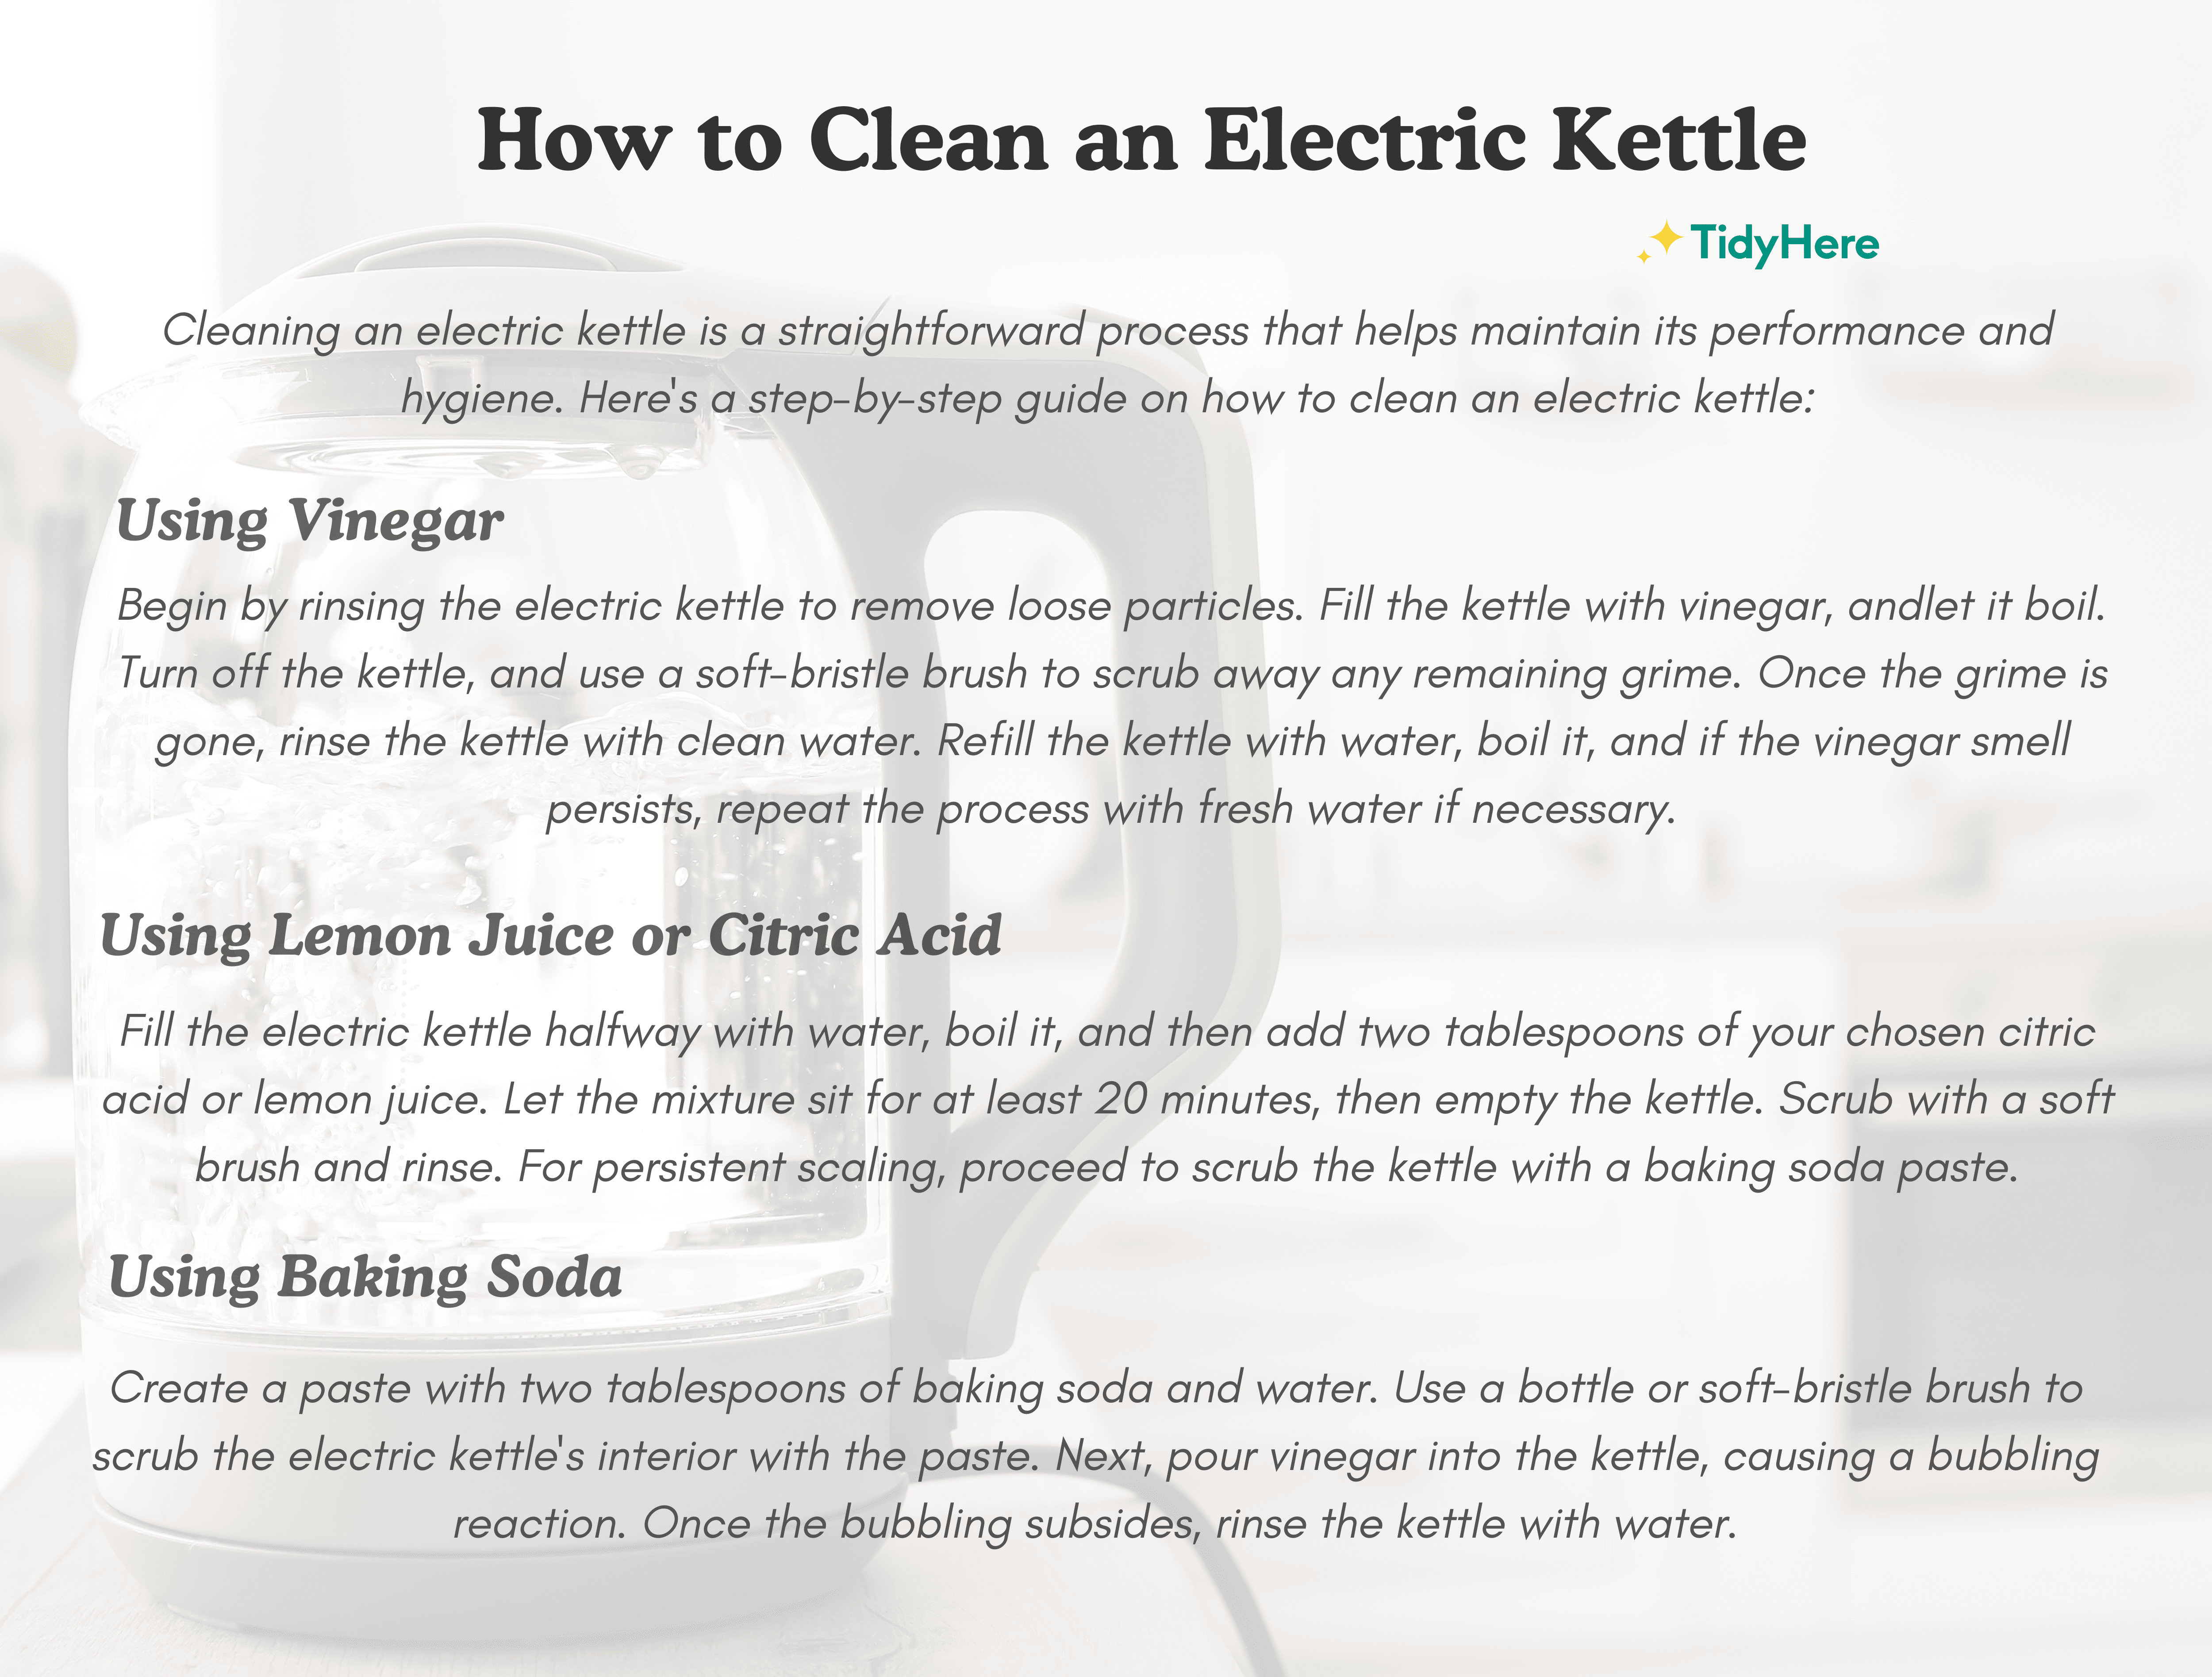 How to Clean an Electric Kettle Tidyhere Infographic